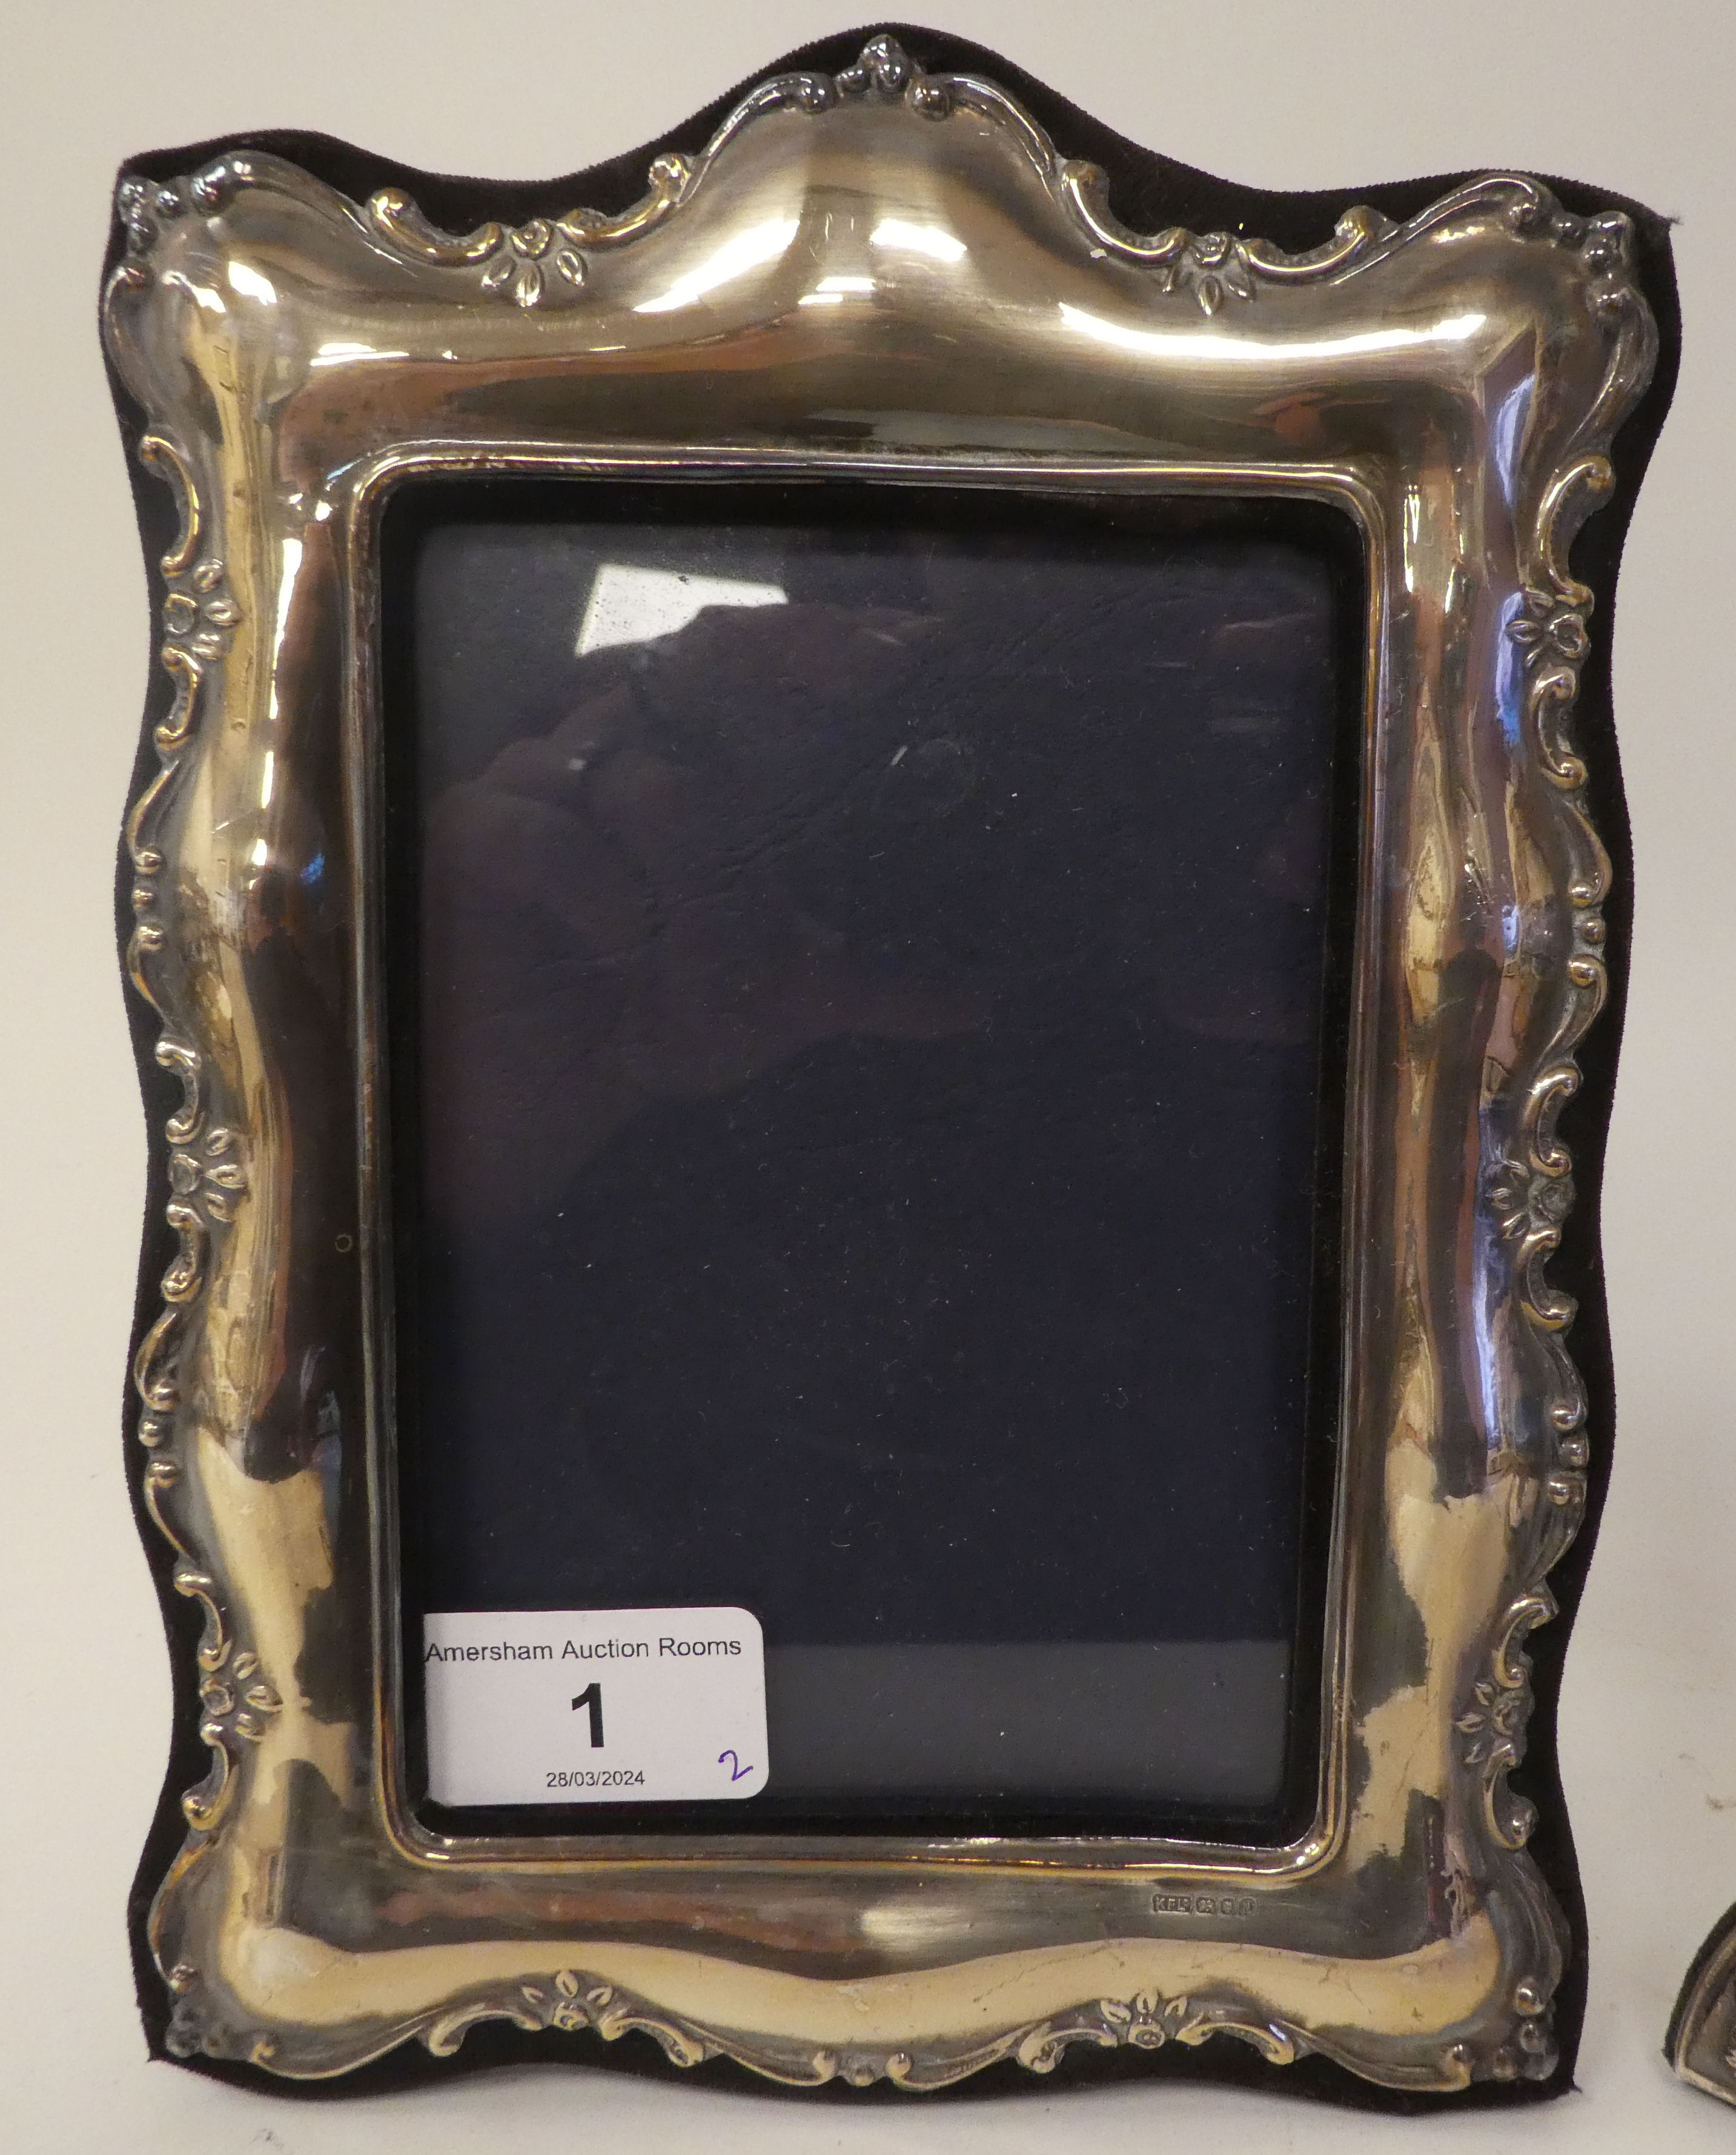 Two dissimilar, glazed, silver mounted photograph frames with embossed ornament, fabric backs and - Image 2 of 6